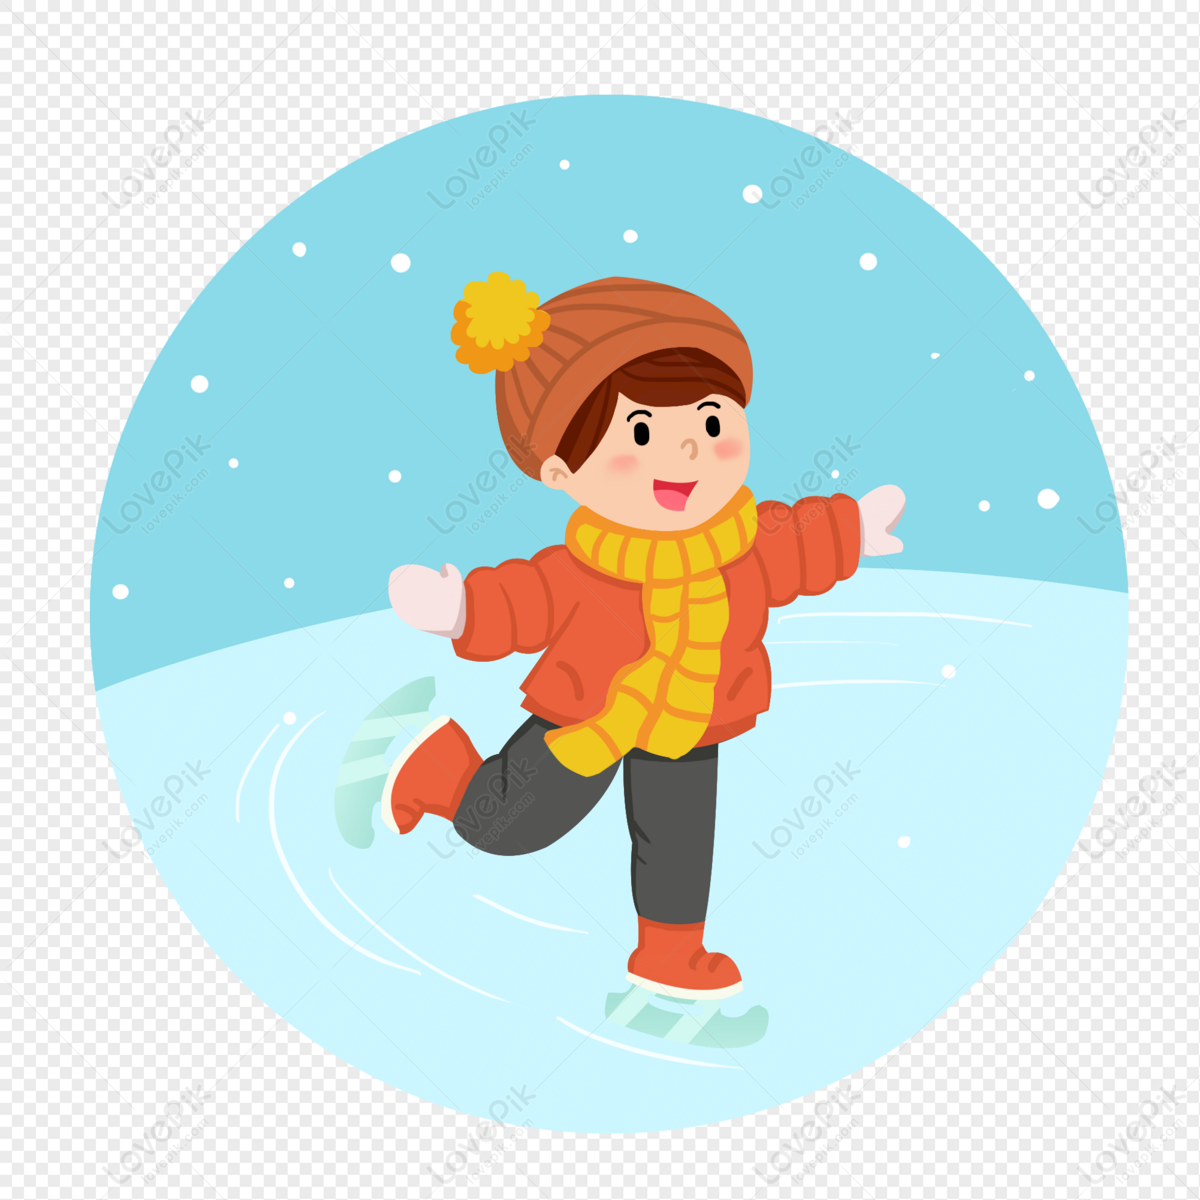 Winter Kid Skating Cartoon Elements PNG Image And Clipart Image For Free  Download - Lovepik | 401871878